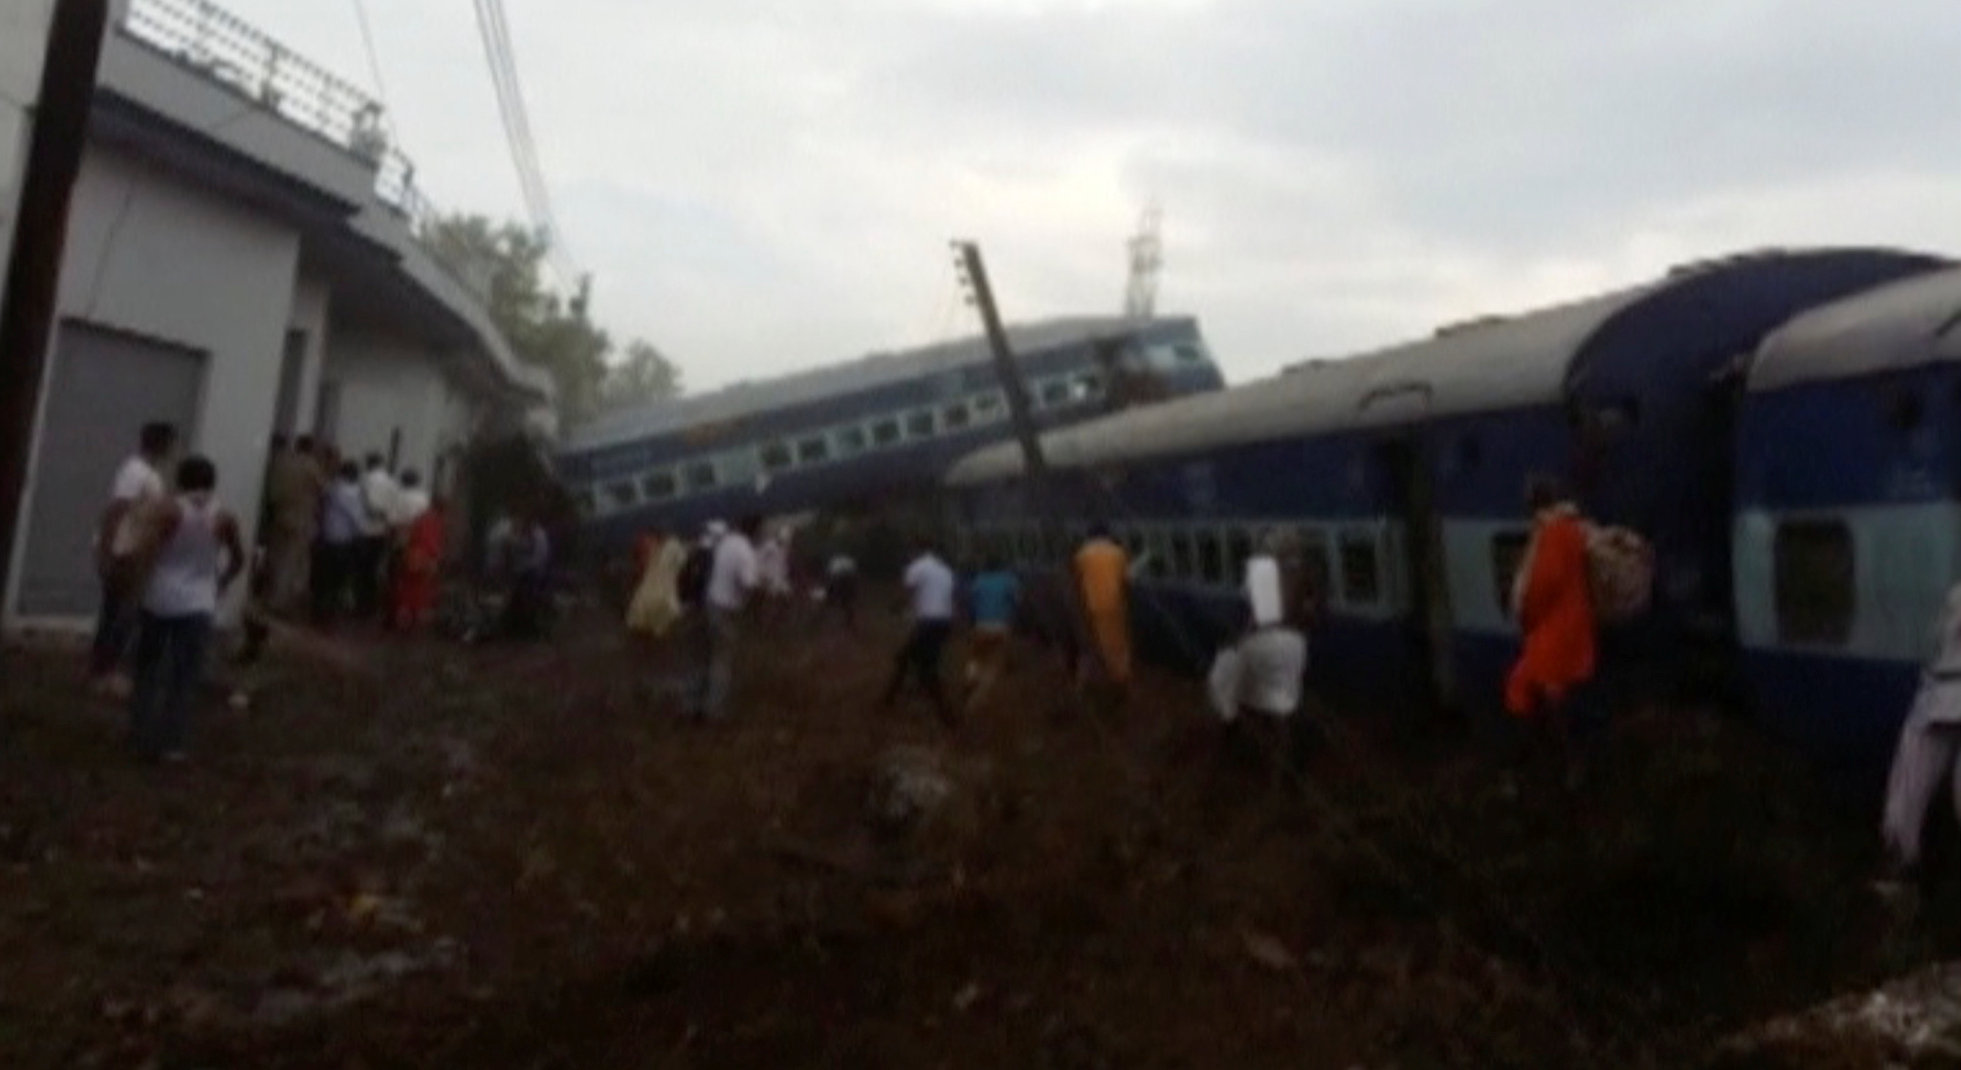 In pictures: Train accident in state of Uttar Pradesh, India